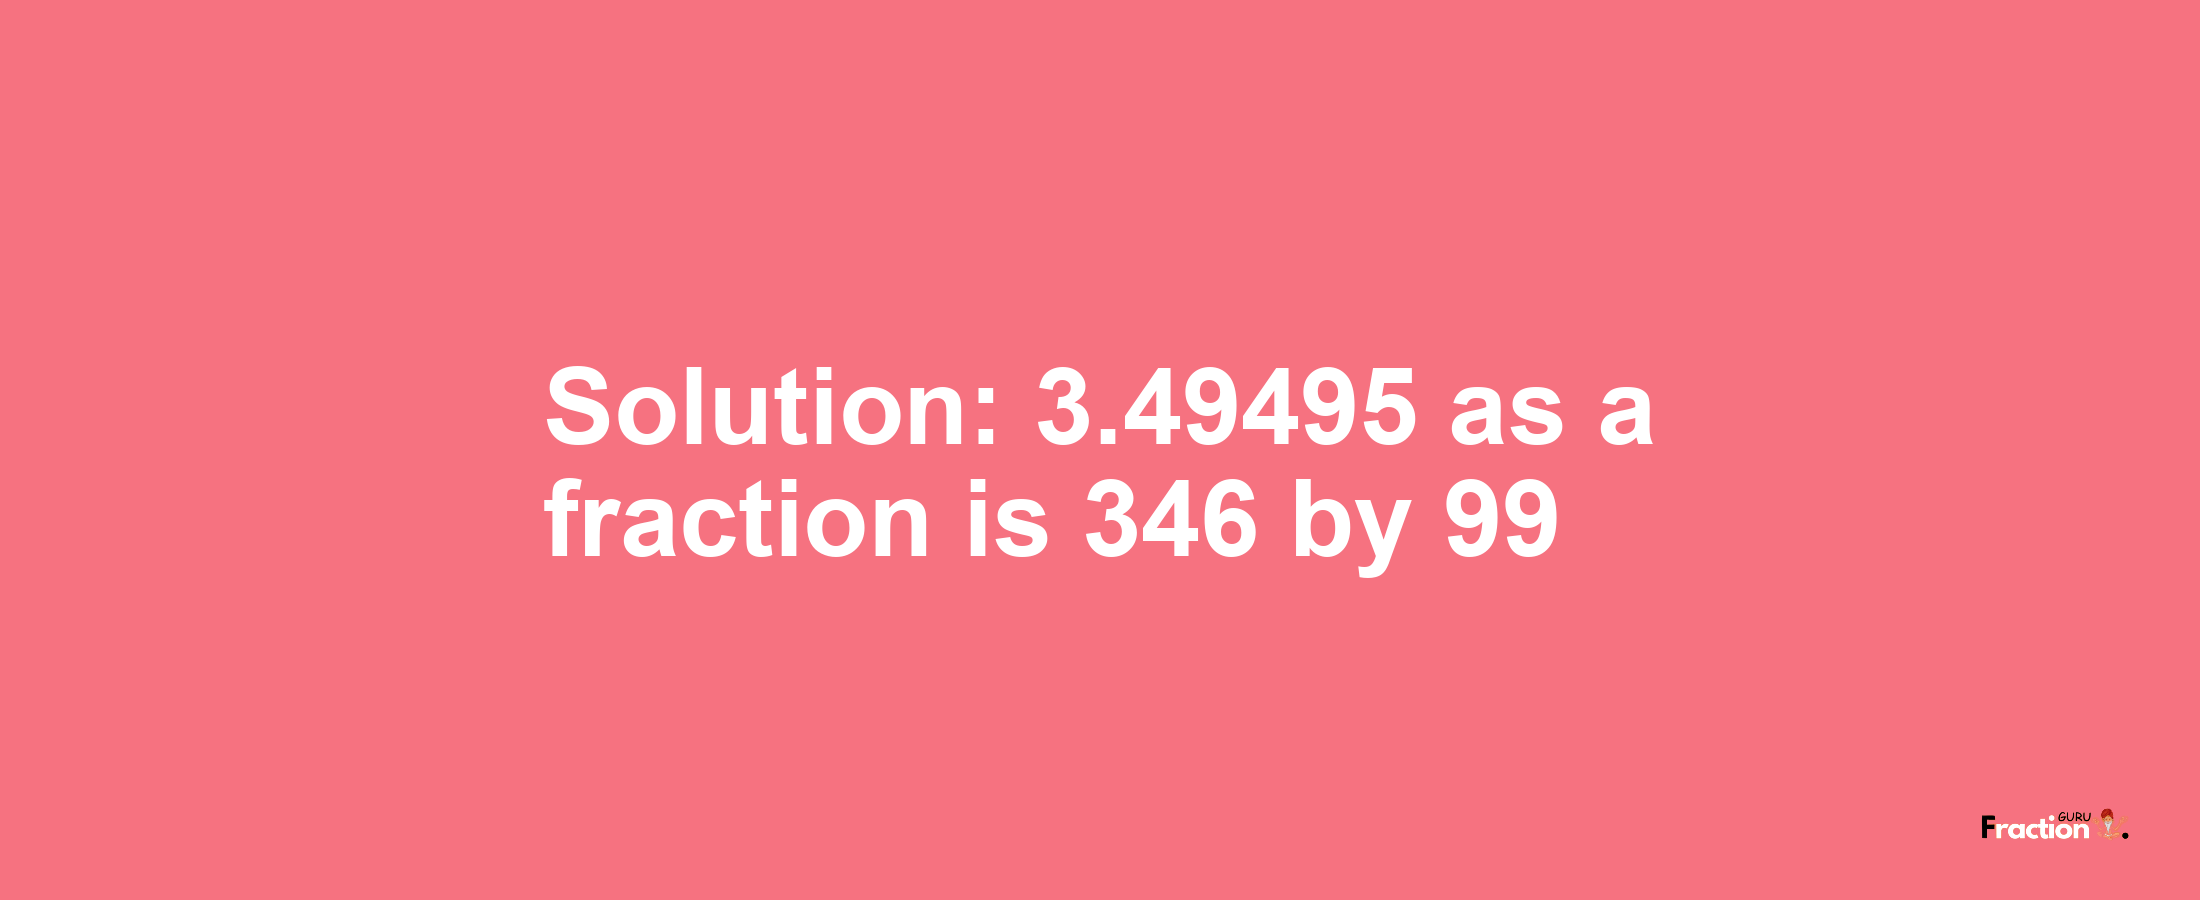 Solution:3.49495 as a fraction is 346/99